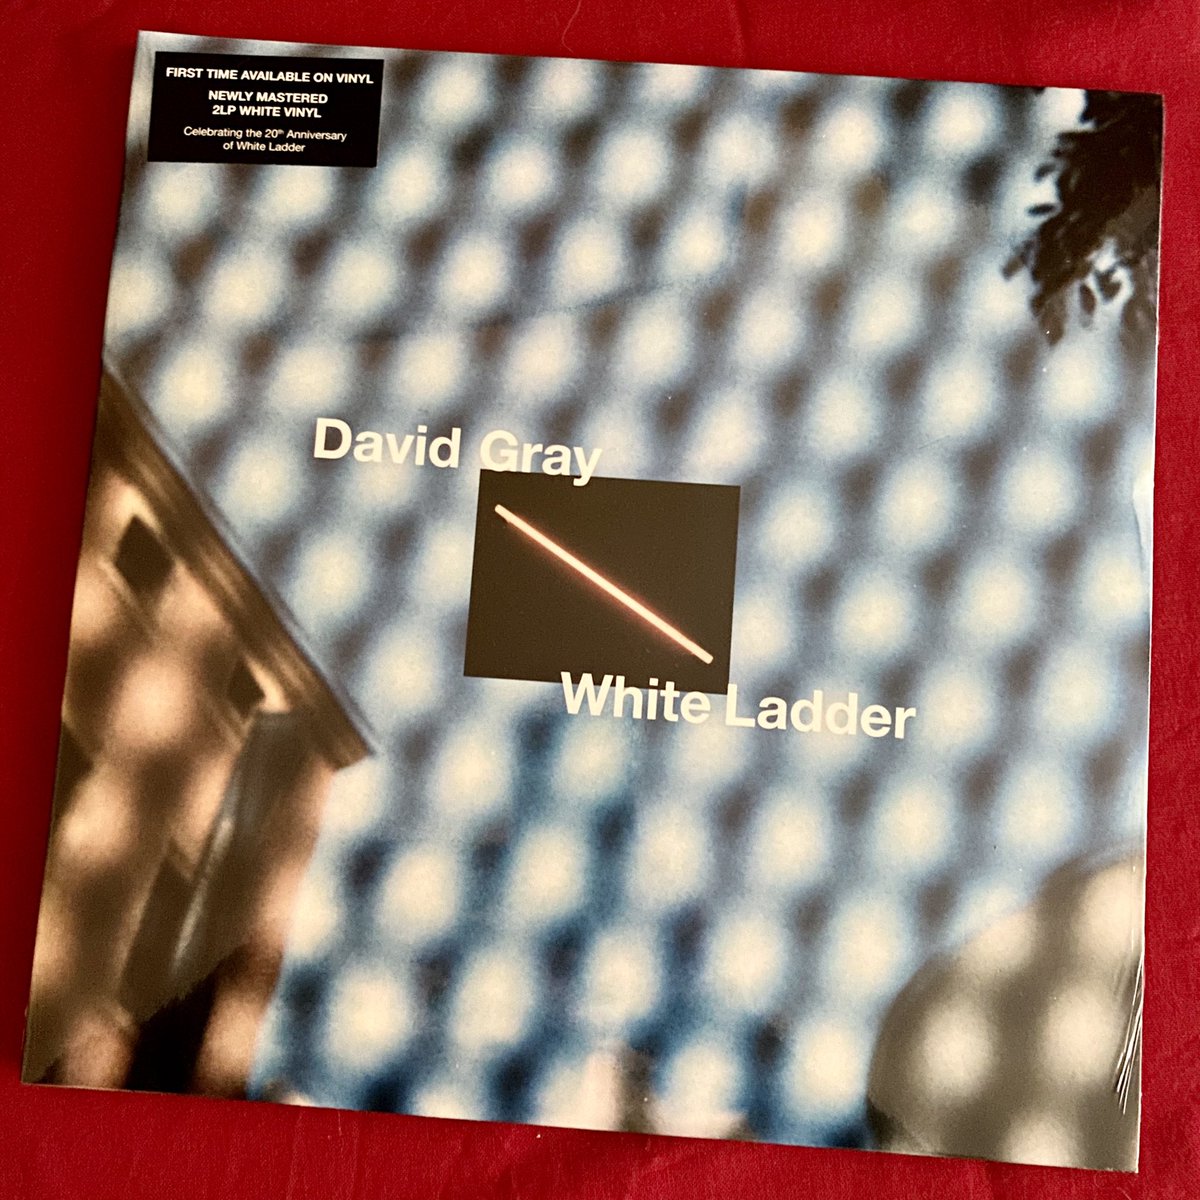 My flabber is gasted! Ordered from @waxandbeans at 2:55pm after seeing a tweet from @AndieD78; delivered to my door at 3:20pm! It’s not like they live next door or anything either. 

@DavidGray #WhiteLadder #VinylRecords #LoveRecordStores